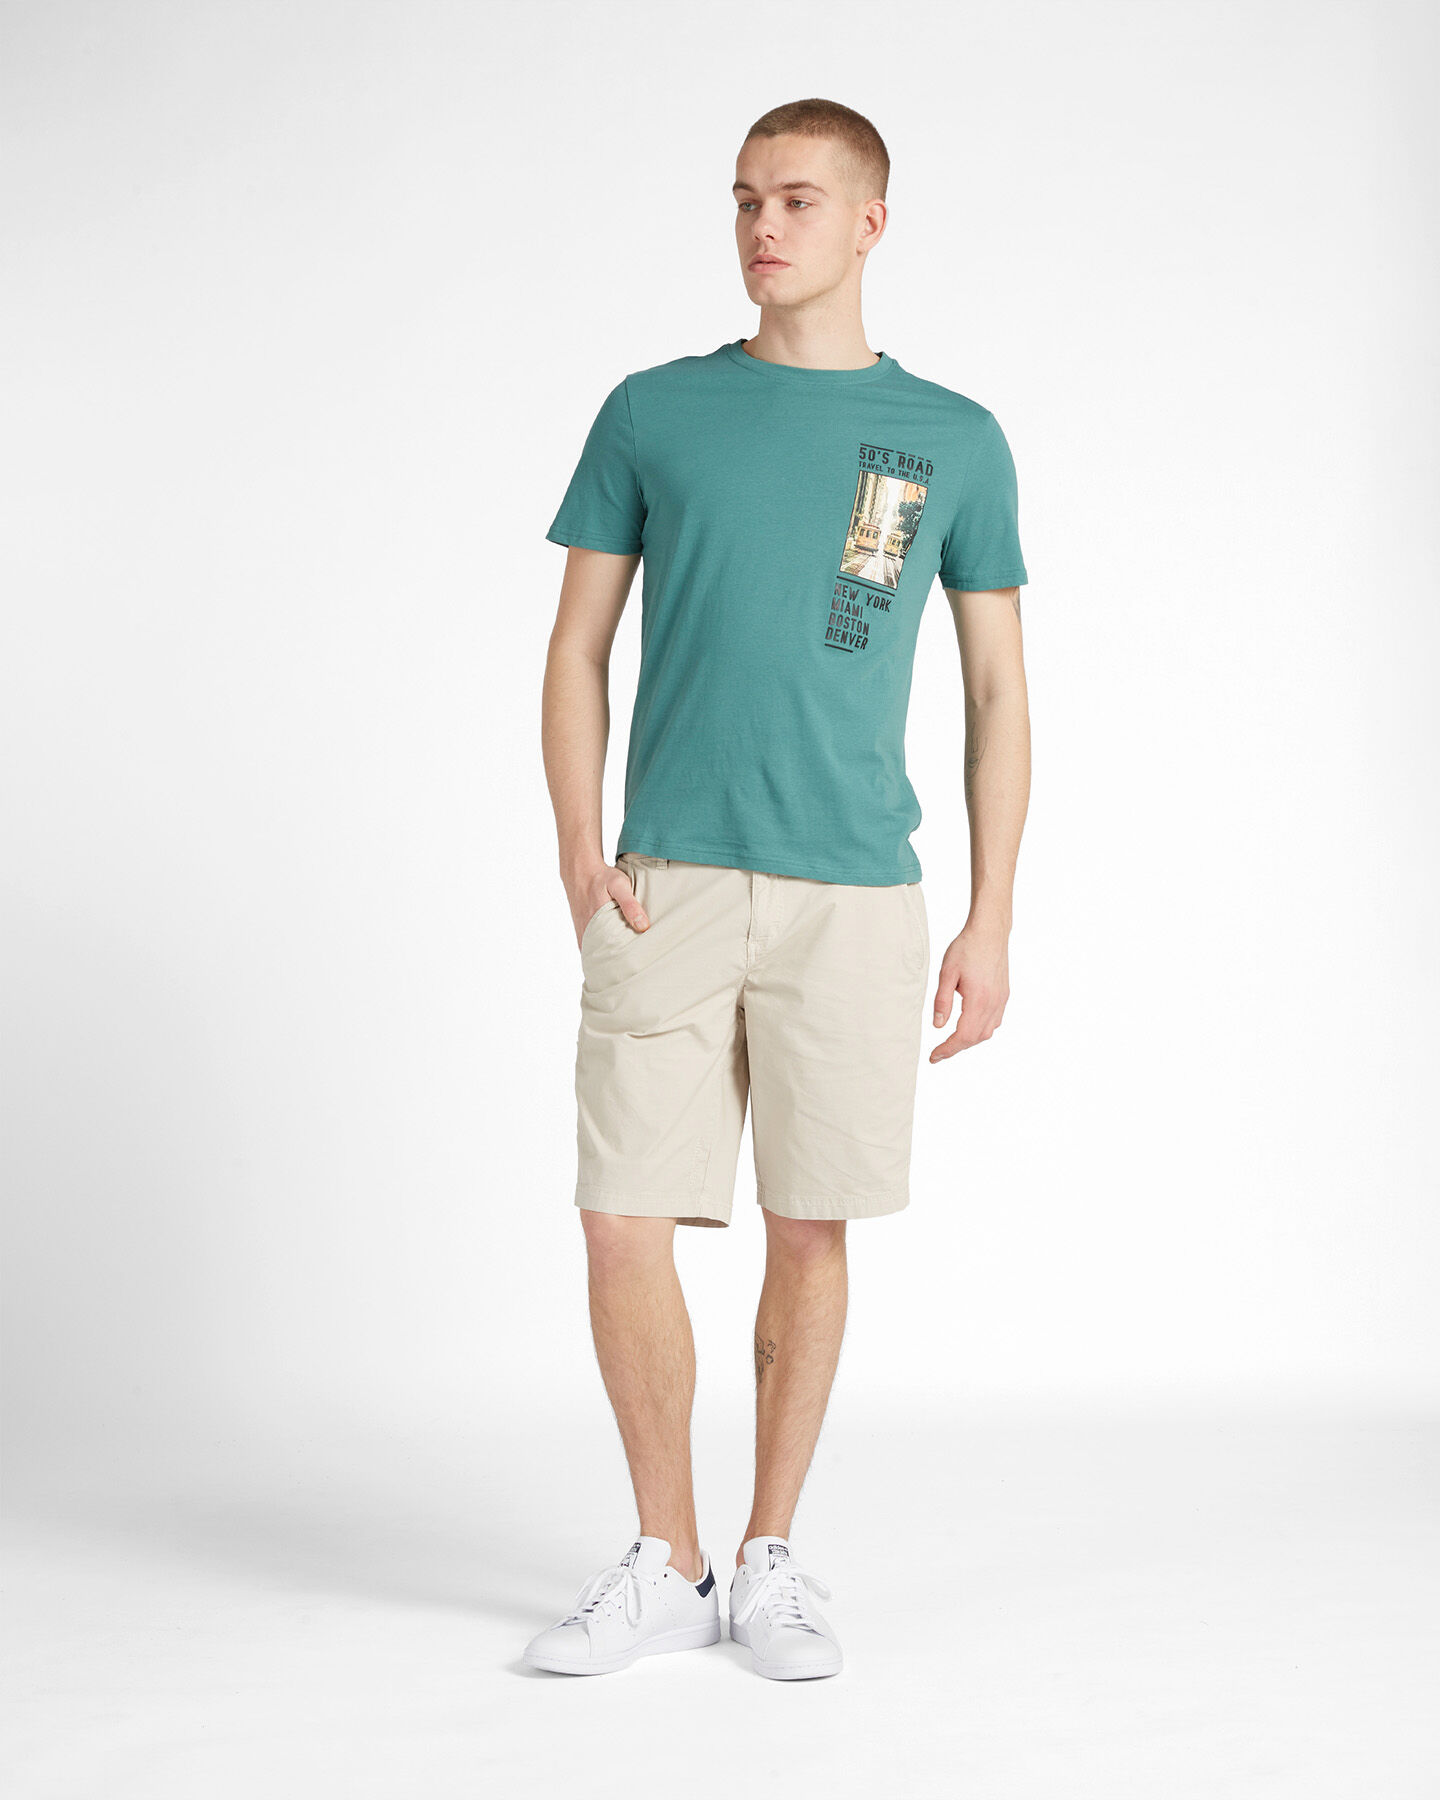  T-Shirt DACK'S BASIC COLLECTION M S4118346|774|XS scatto 1